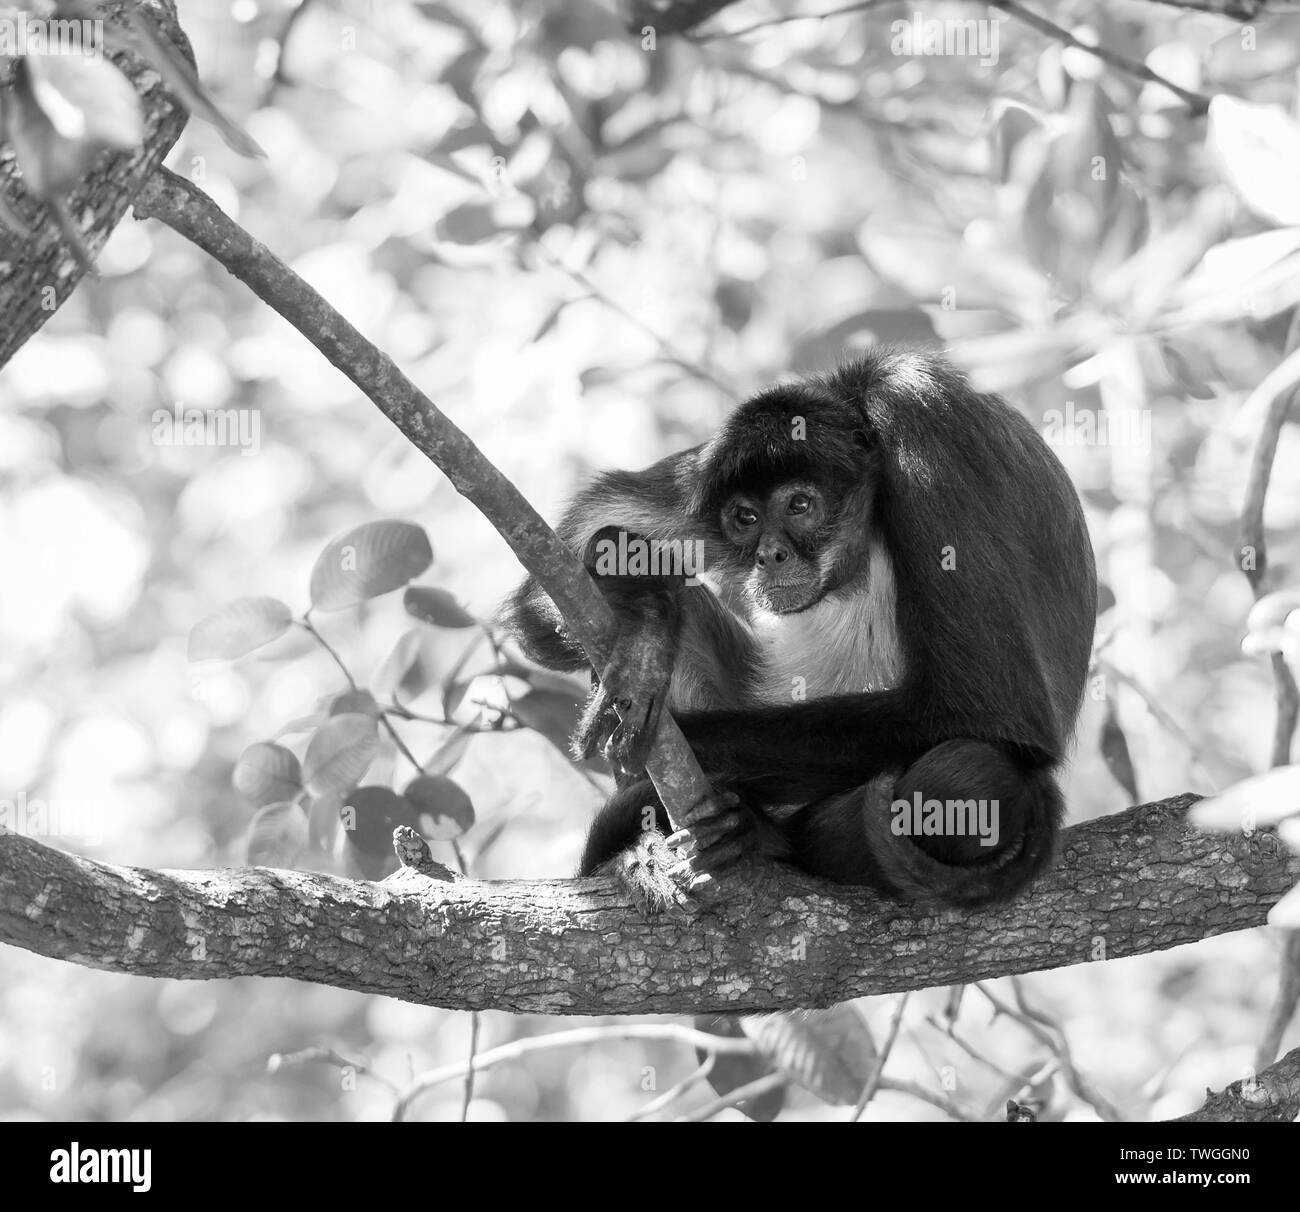 Yucatan spider monkey sitting on a tree branch in forest in stunning black and white Stock Photo